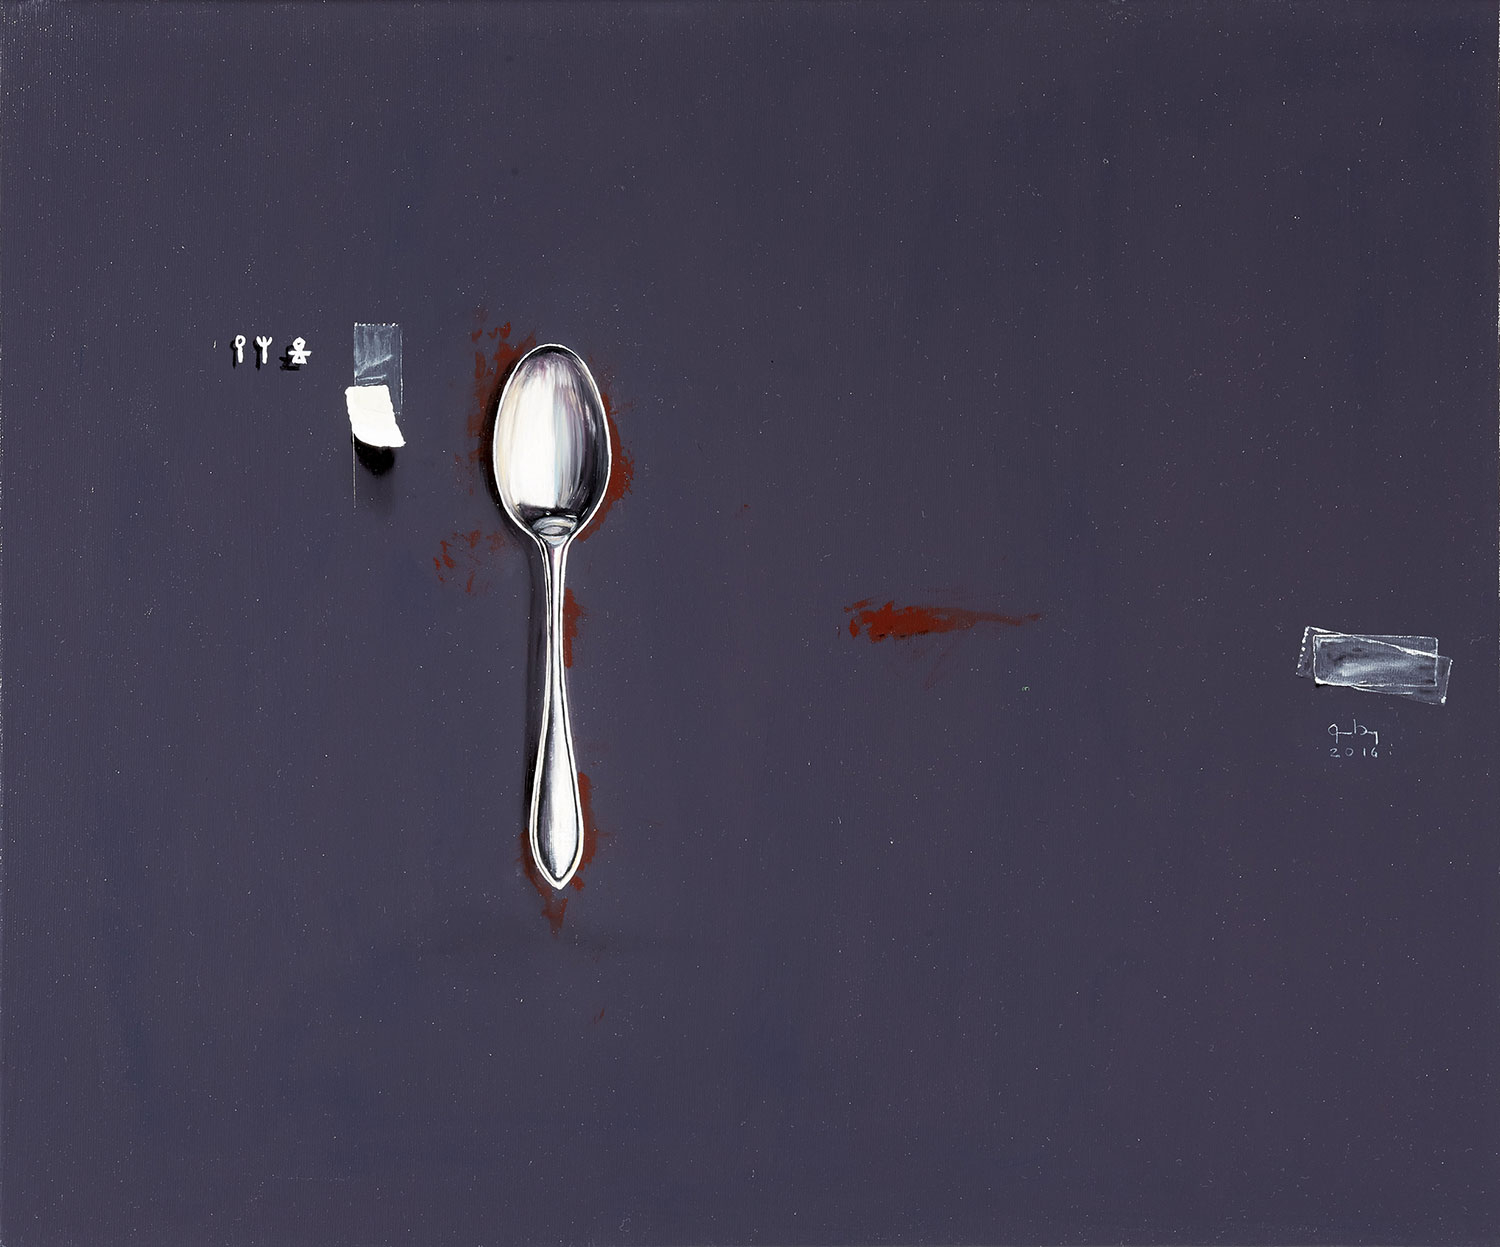 Why do I know that this is a spoon | Oil on canvas | 60 x 50 cm